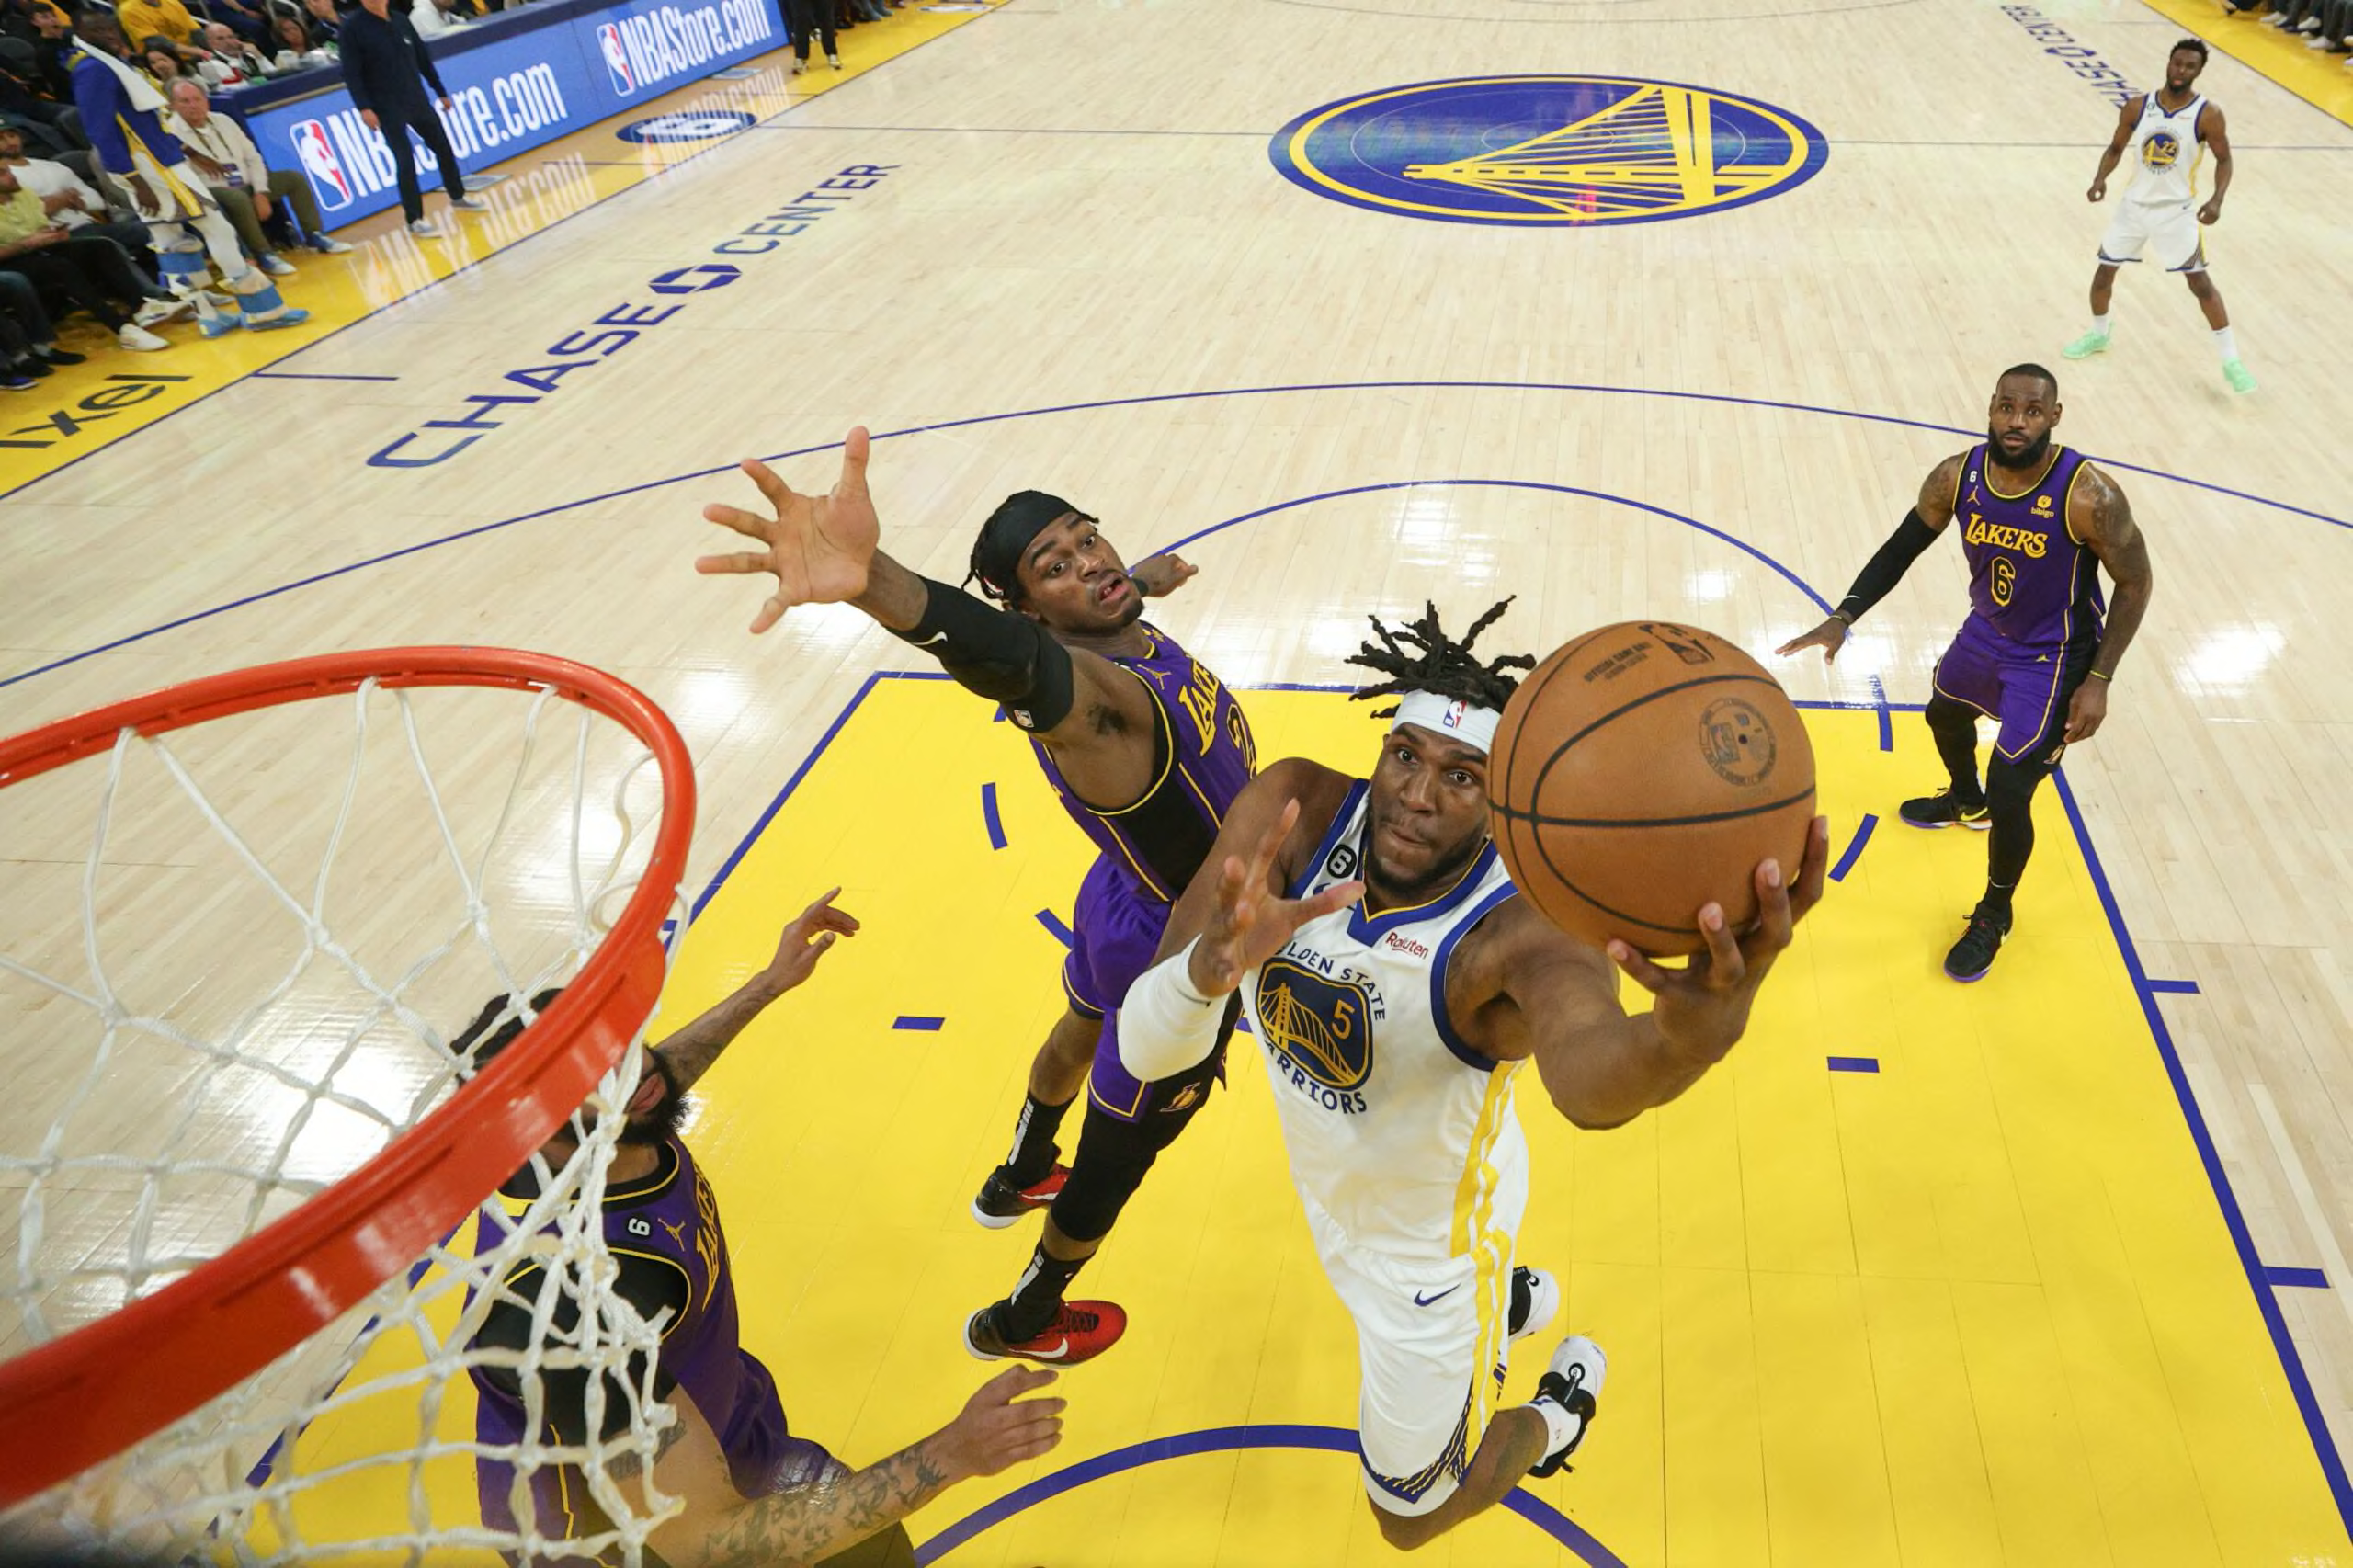 Golden State Warriors vs. Los Angeles Lakers Expected Lineups